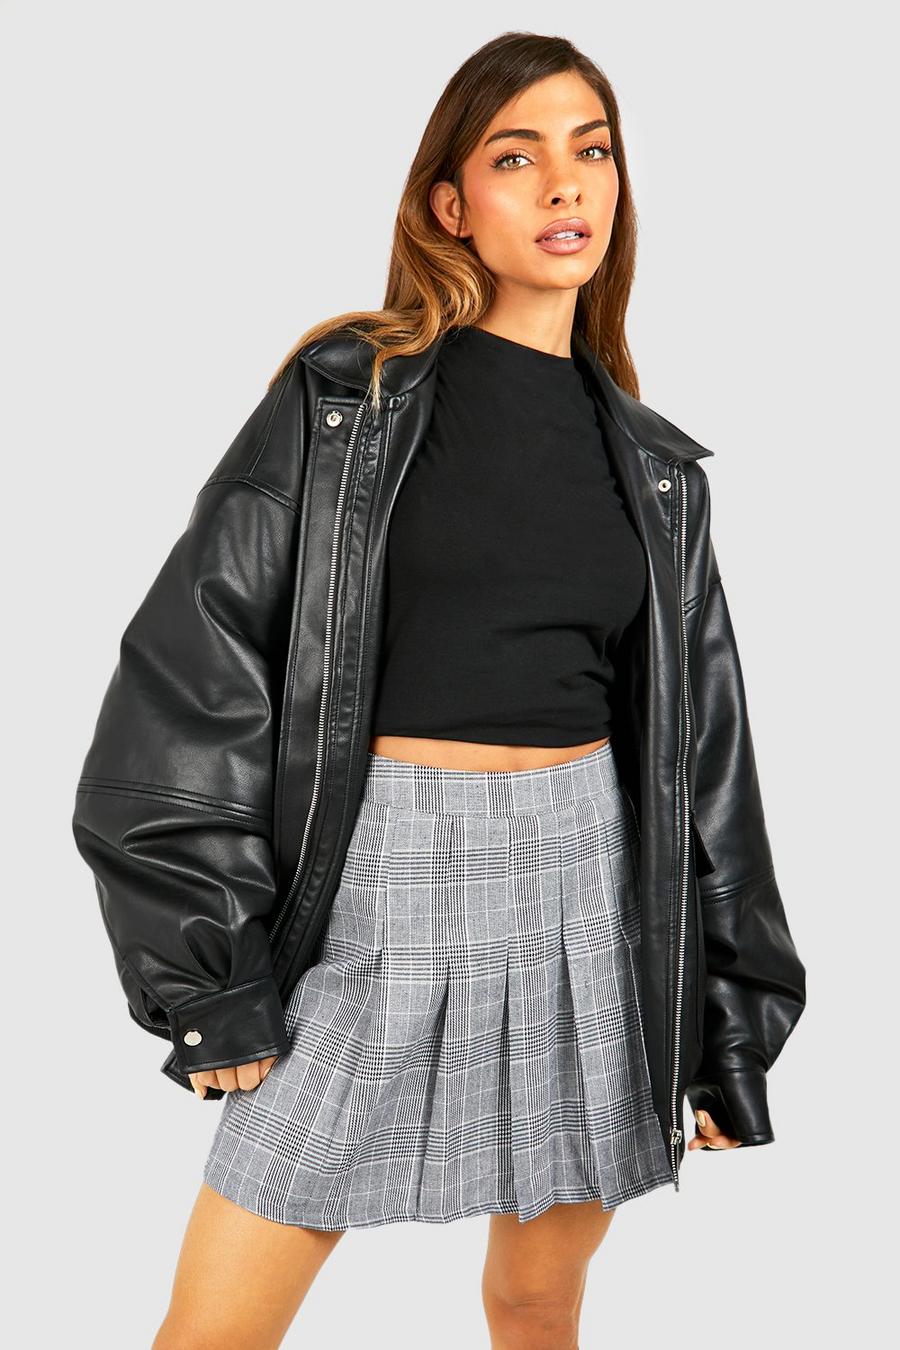 Charcoal grey Woven Check Pleated Tennis Skirt